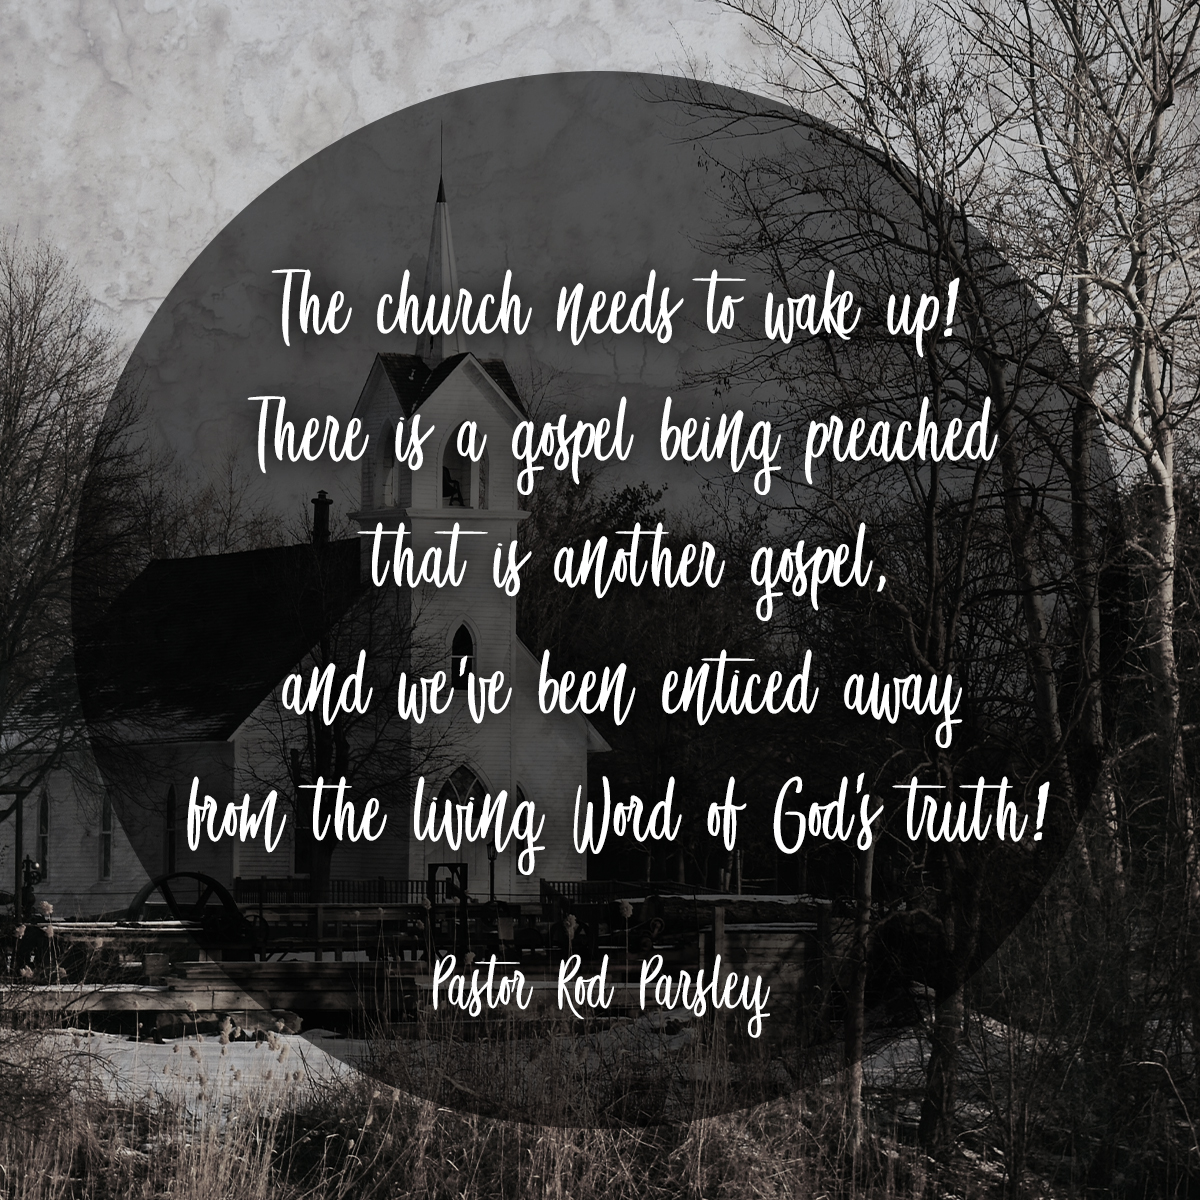 “The church needs to wake up! There is a gospel being preached that is another gospel, and we’ve been enticed away from the living Word of God’s truth!” – Pastor Rod Parsley